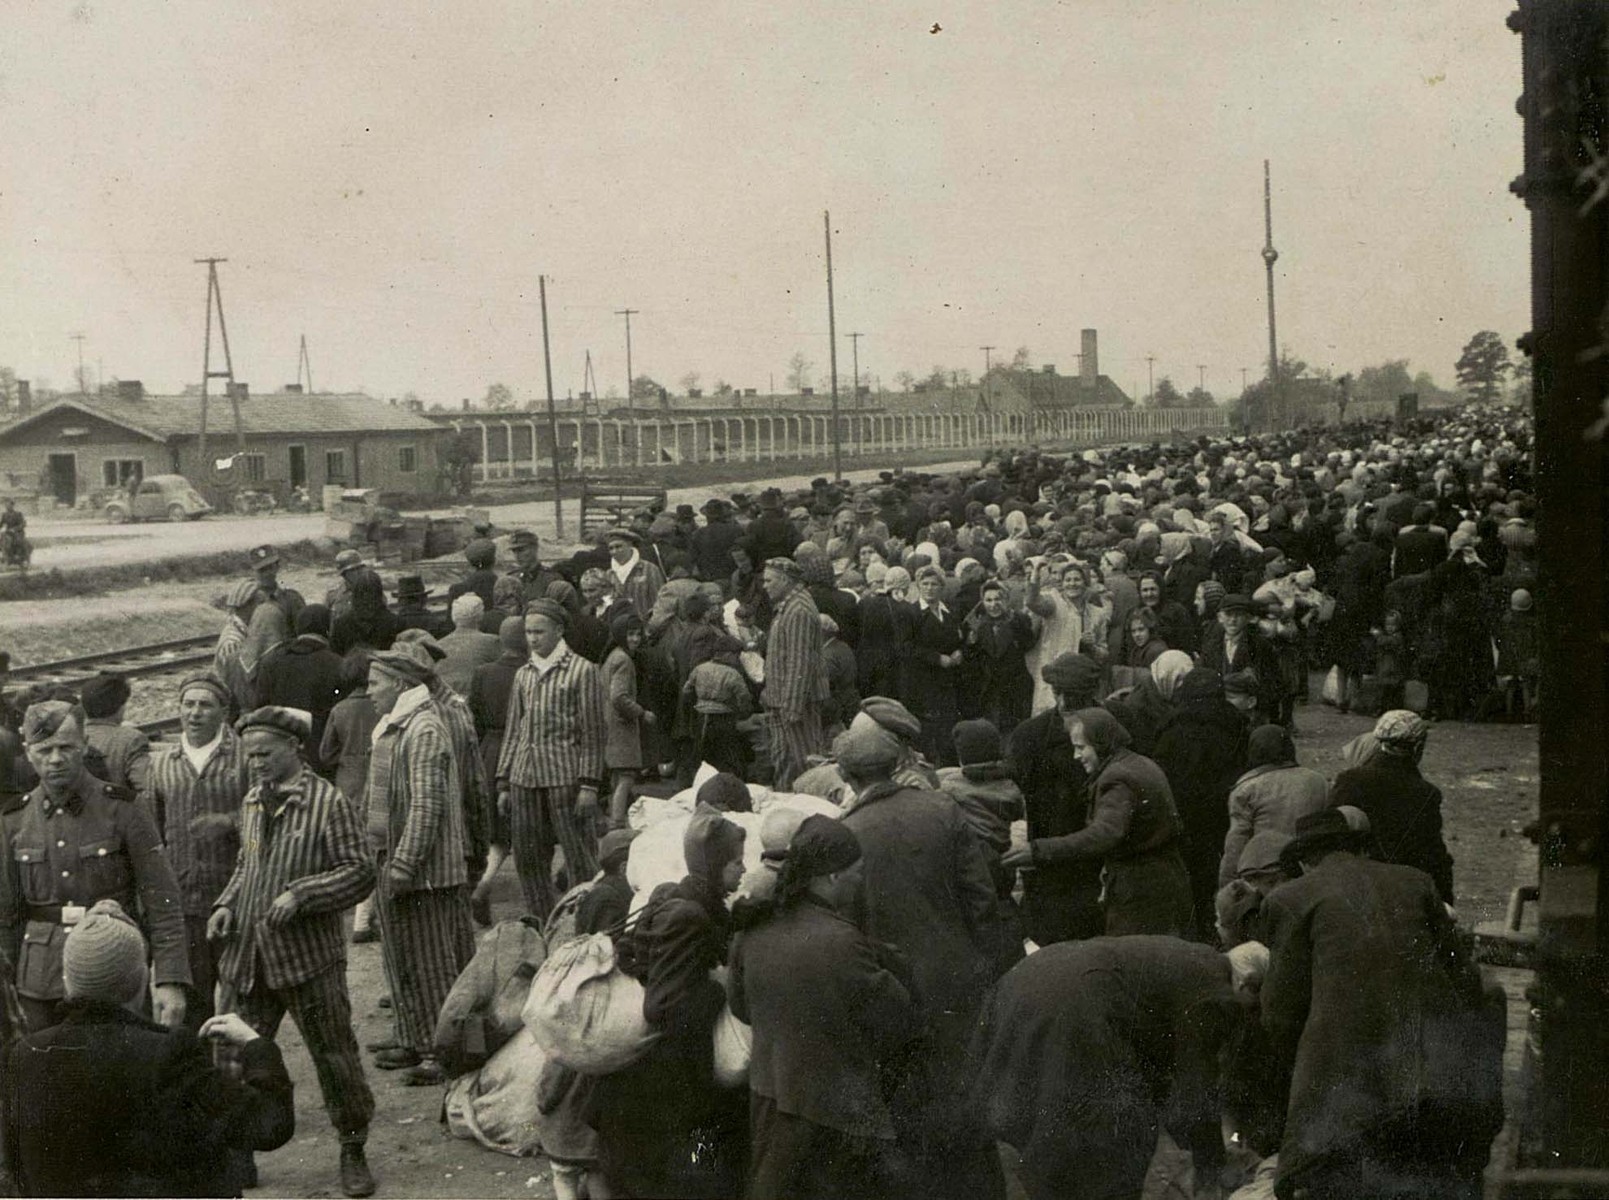 Jews from Subcarpathian Rus await selection on the ramp at Auschwitz-Birkenau.  On the left is a group of uniformed prisoners from the Kanada commando and a few SS men.  

Among those pictured is Zalman-Tuvia Schwimmer from Dolgoye, who survived the war.